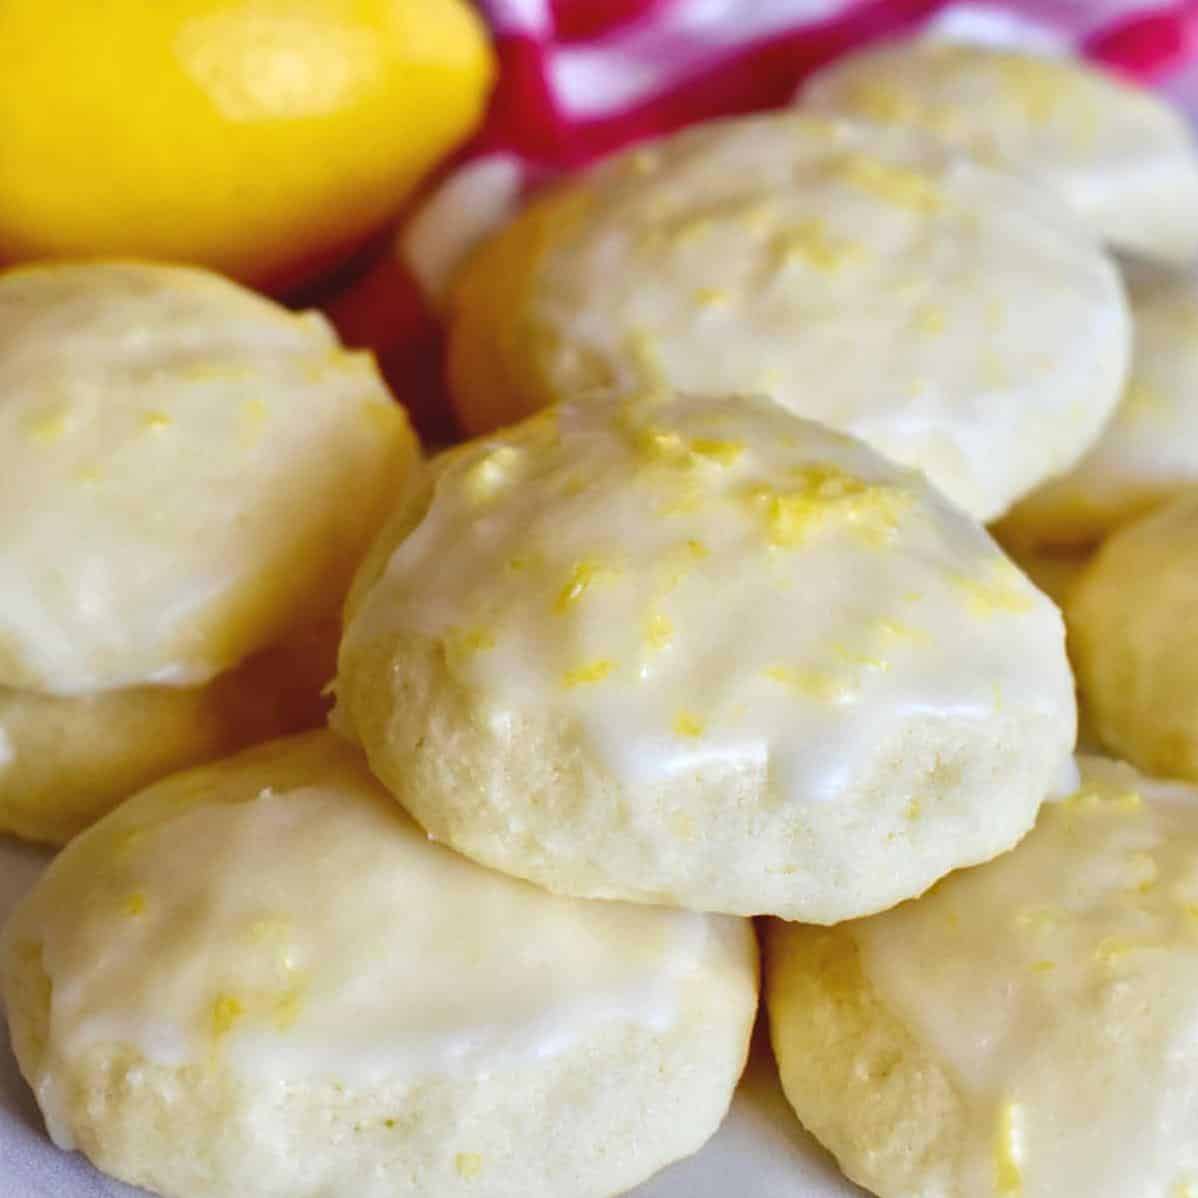  These lemon ricotta cookies are a crowd-pleaser and sure to impress your guests.